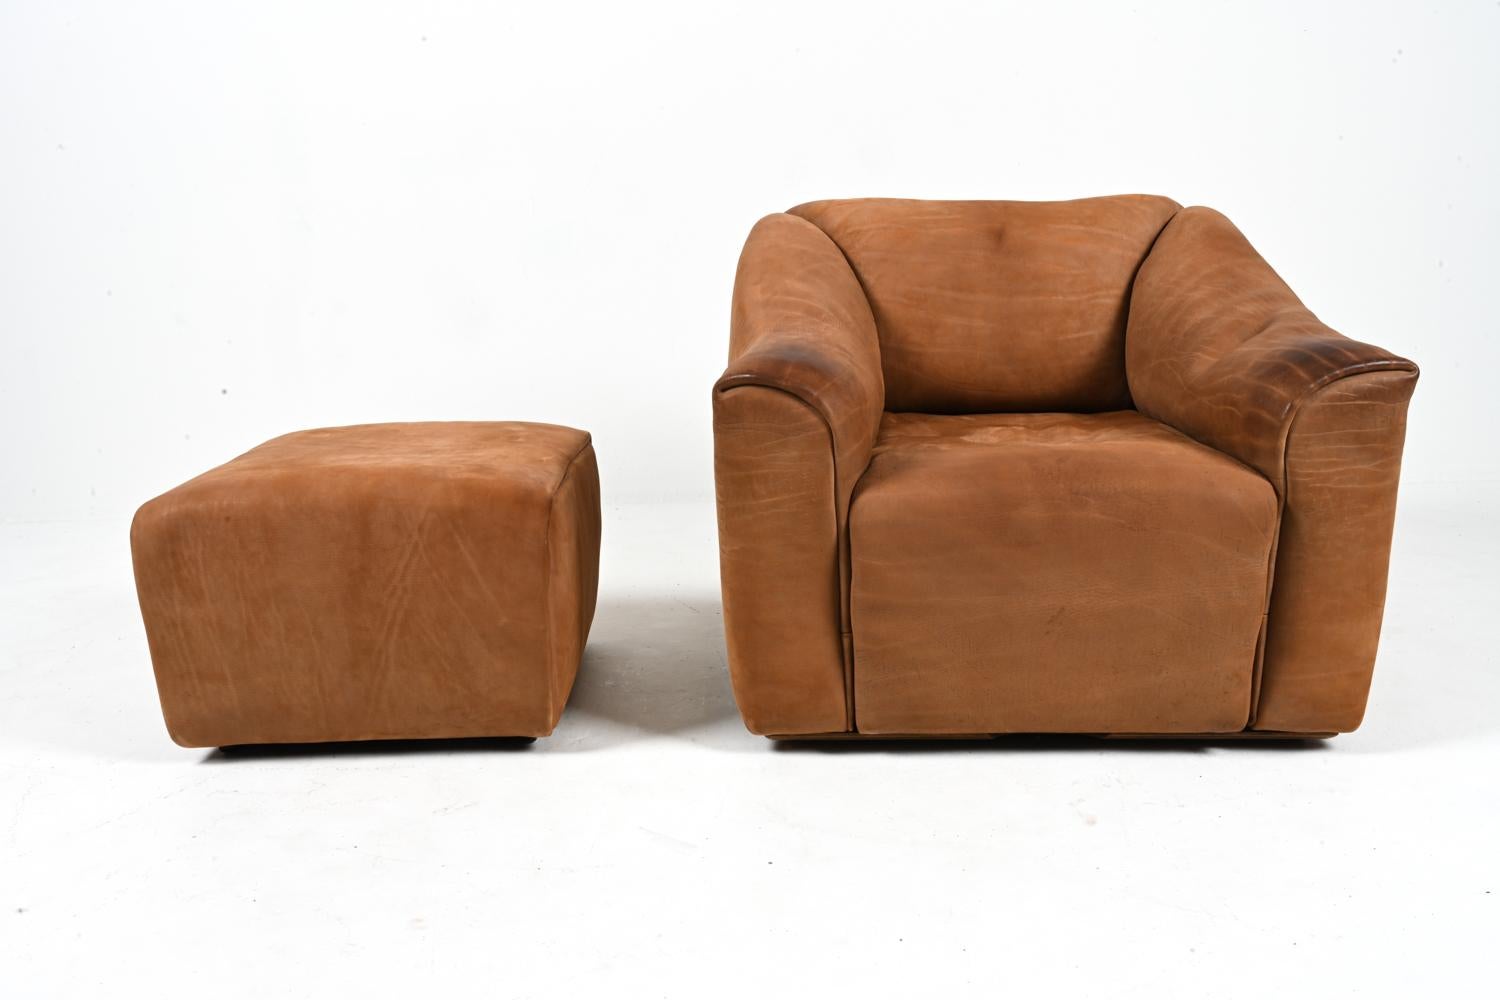 20th Century De Sede DS-47 Lounge Chair & Ottoman in Nubuck Leather, c. 1970's For Sale